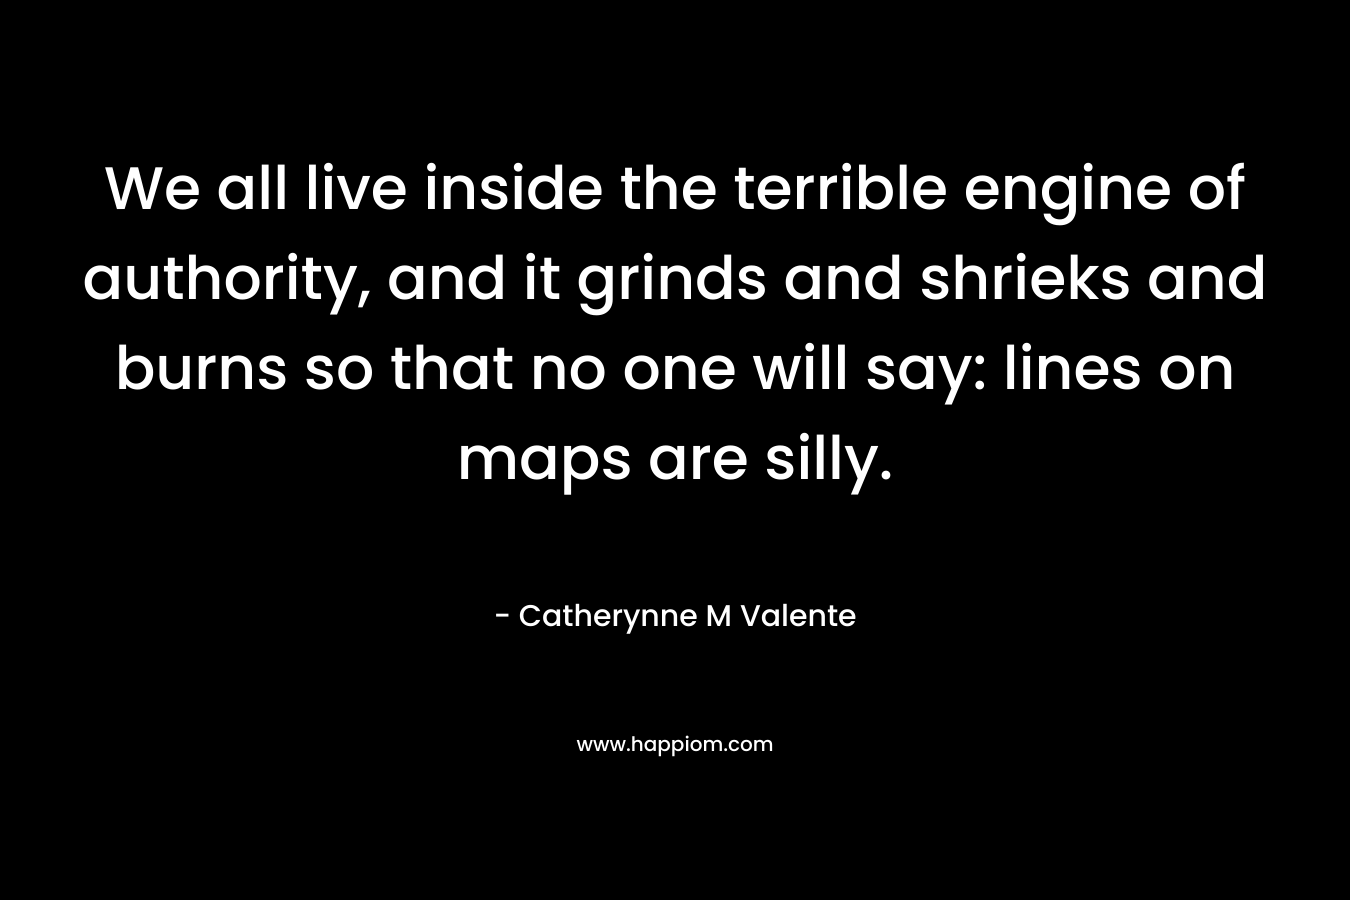 We all live inside the terrible engine of authority, and it grinds and shrieks and burns so that no one will say: lines on maps are silly. – Catherynne M Valente